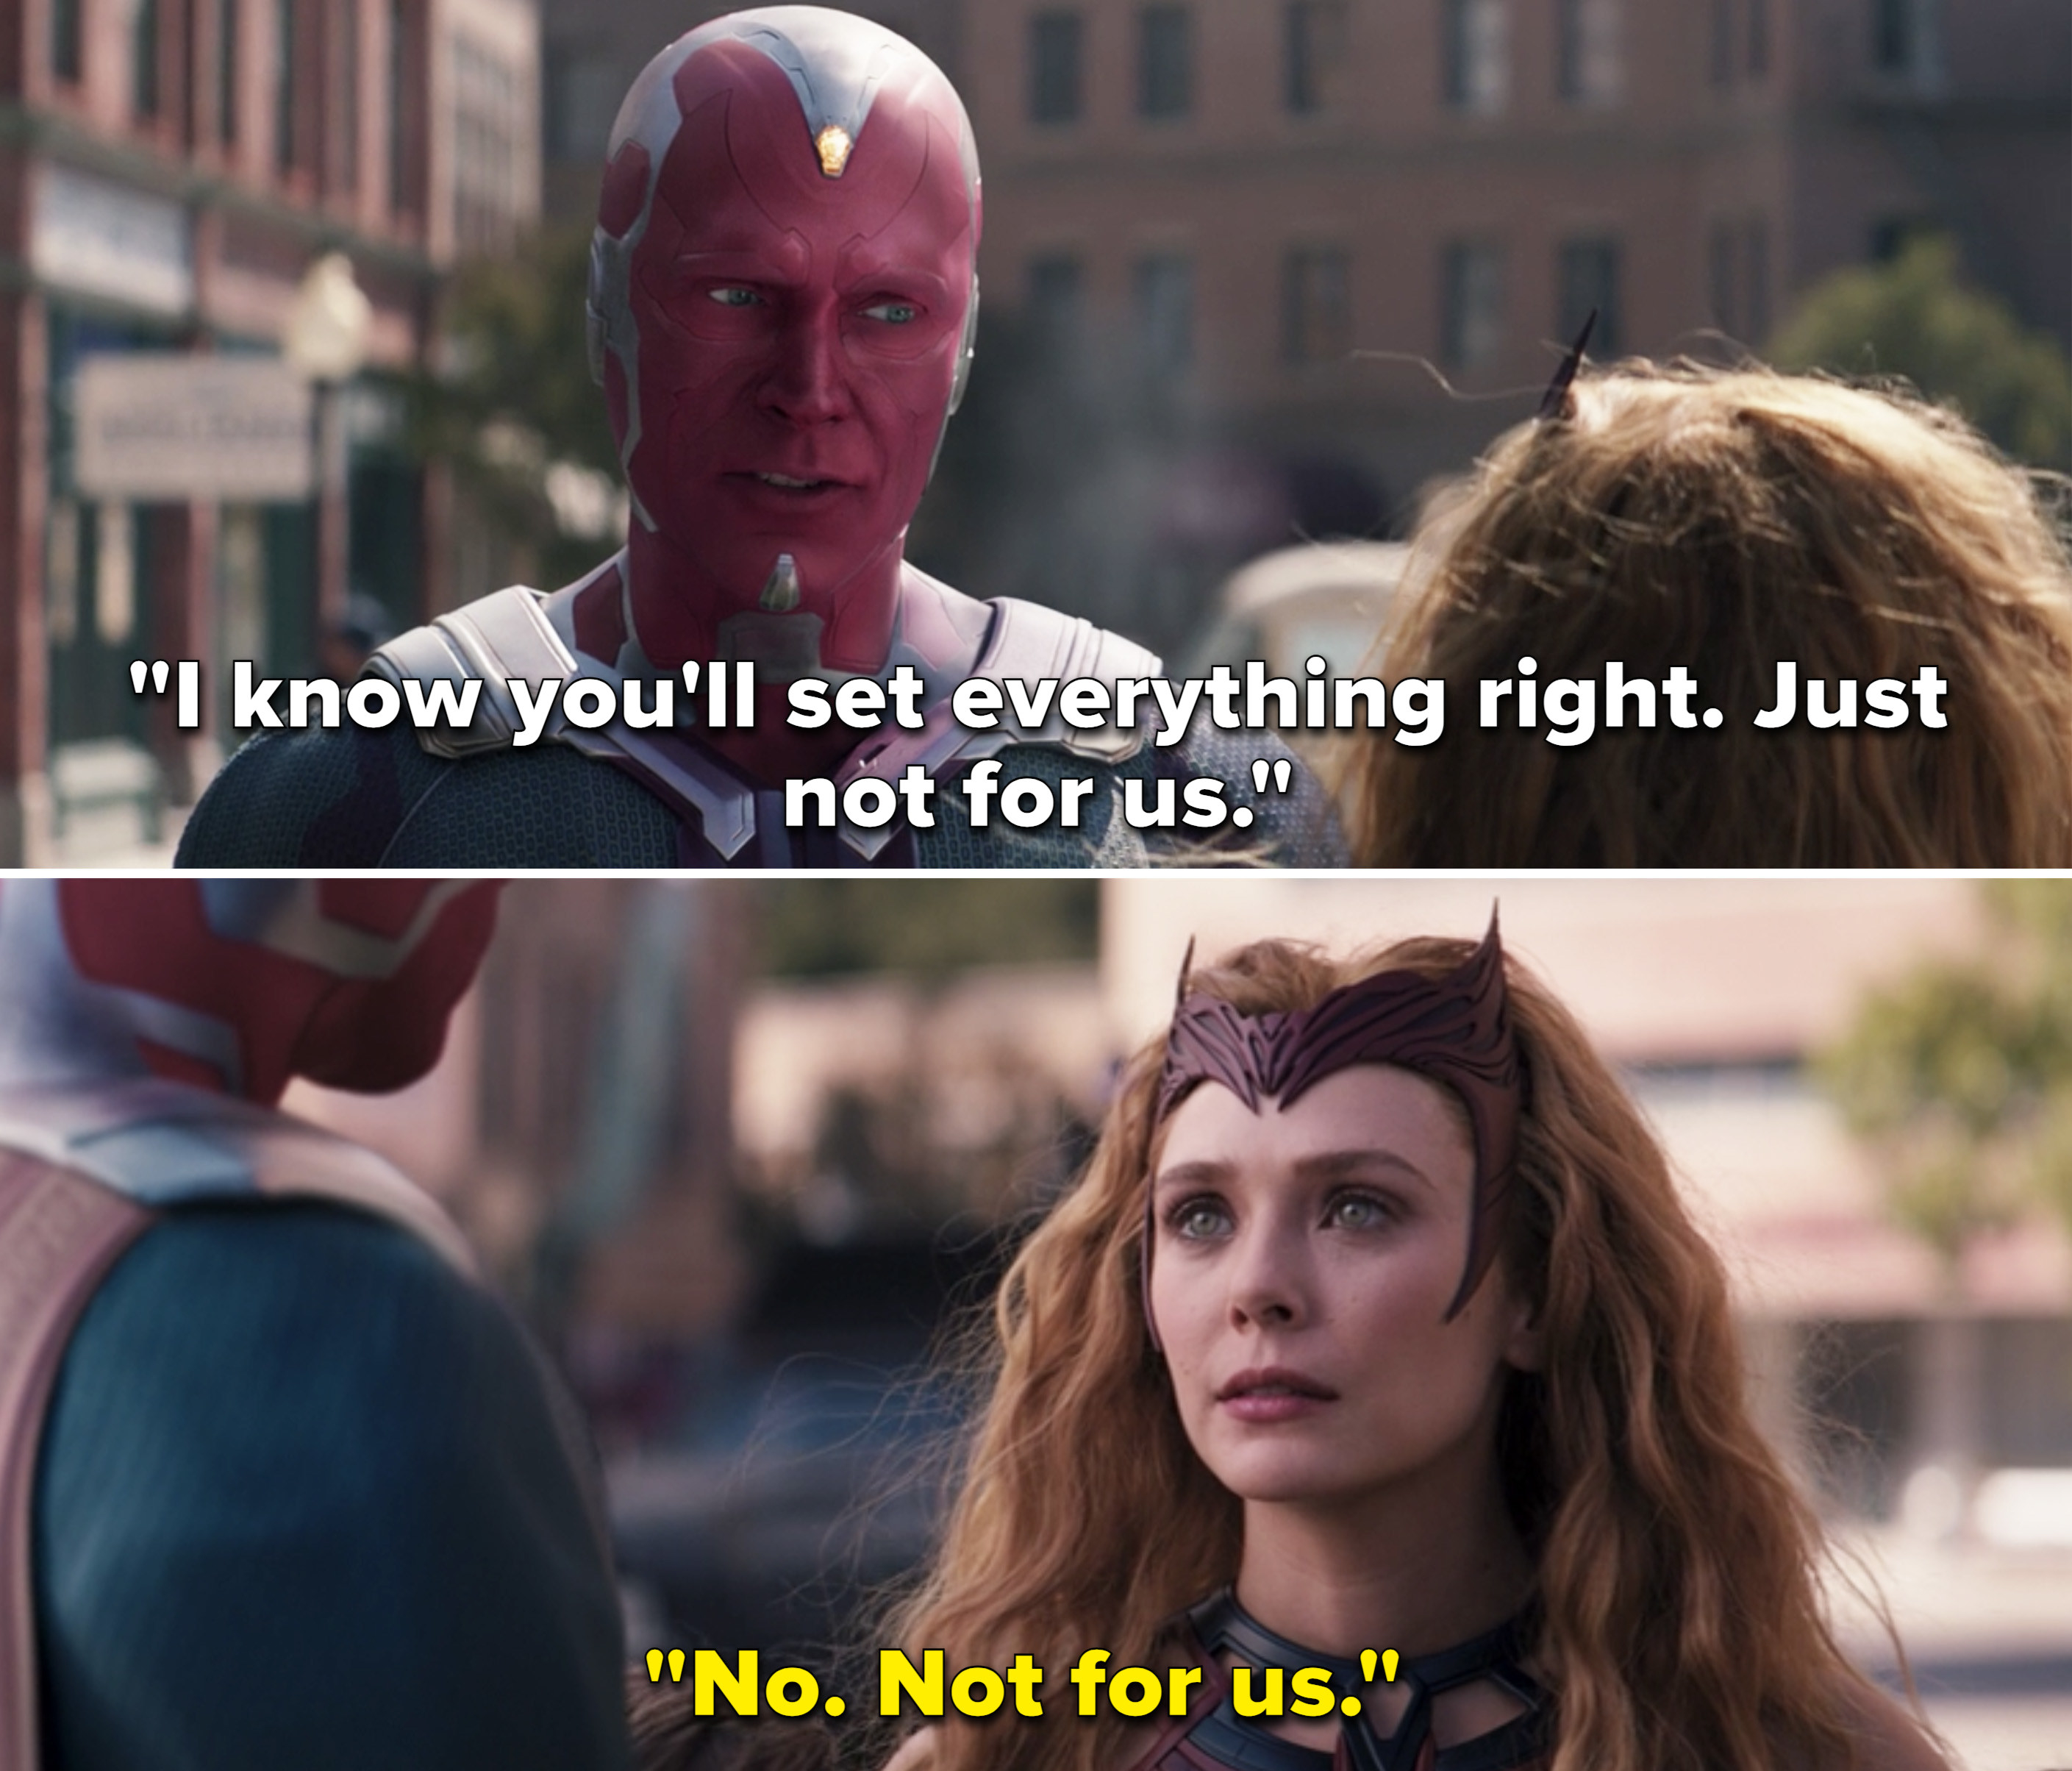 Vision says, "I know you'll set everything right. Just not for us," to which Wanda replies, "No. not for us"